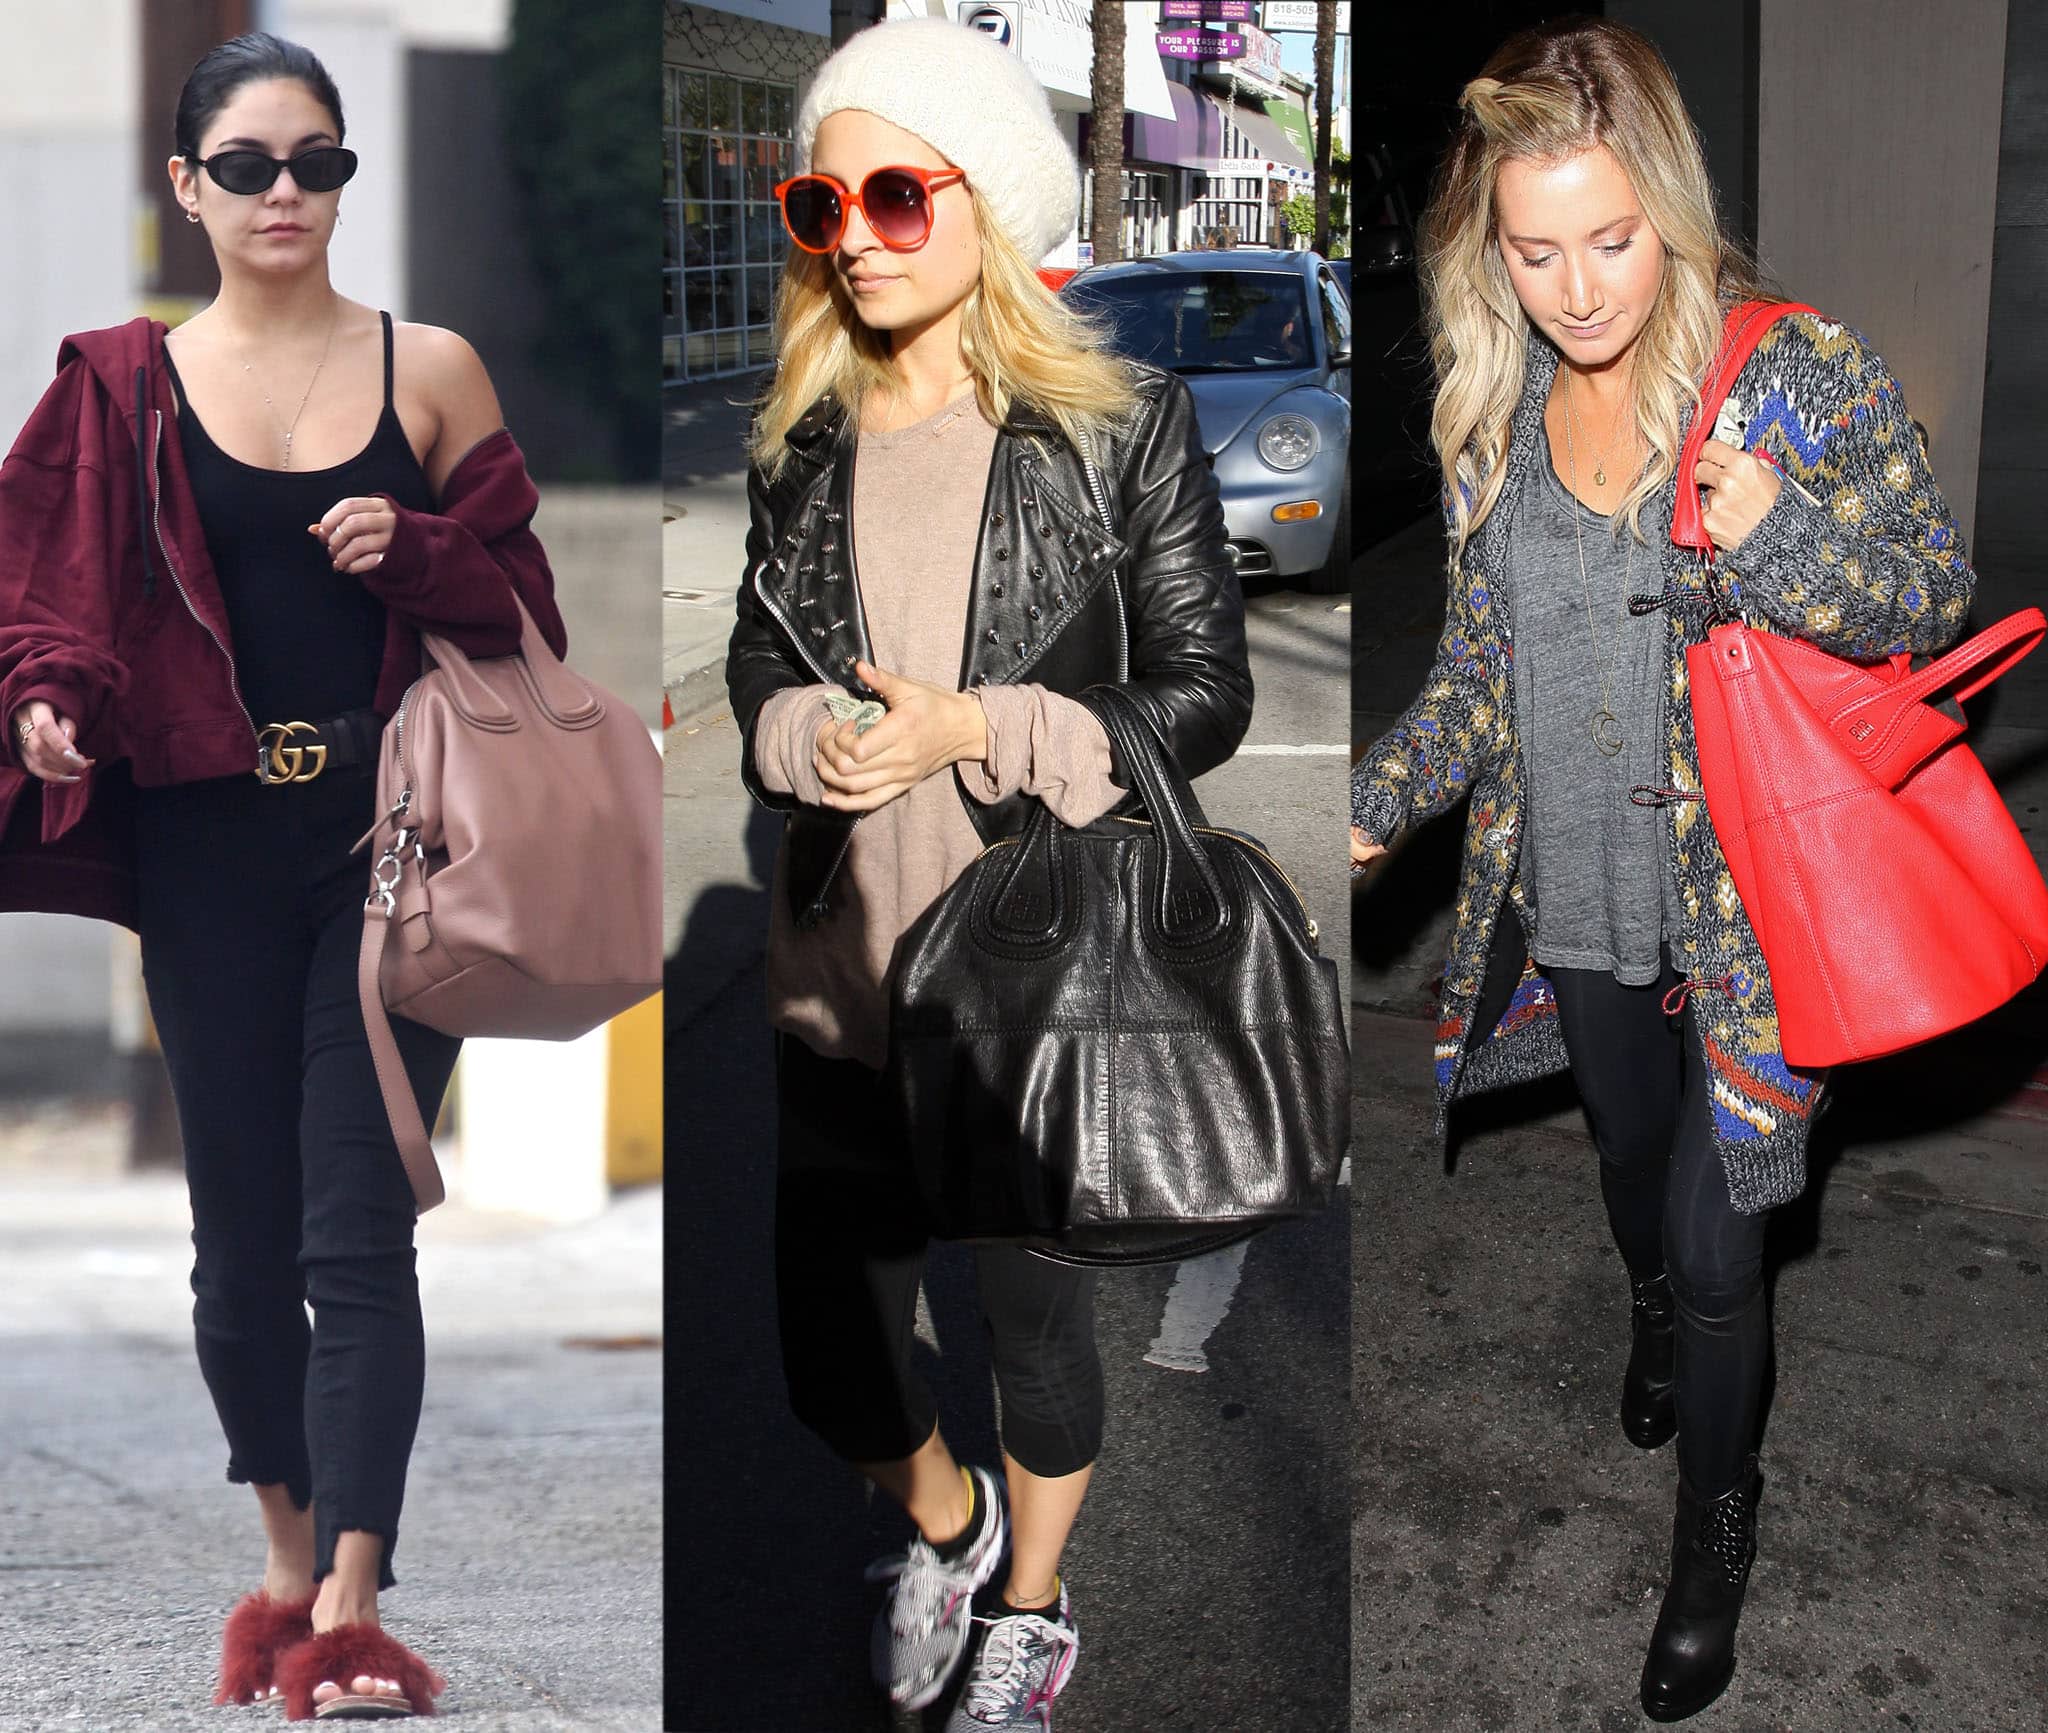 Vanessa Hudgens, Nicole Richie, and Ashley Tisdale toting Givenchy's Nightingale bag